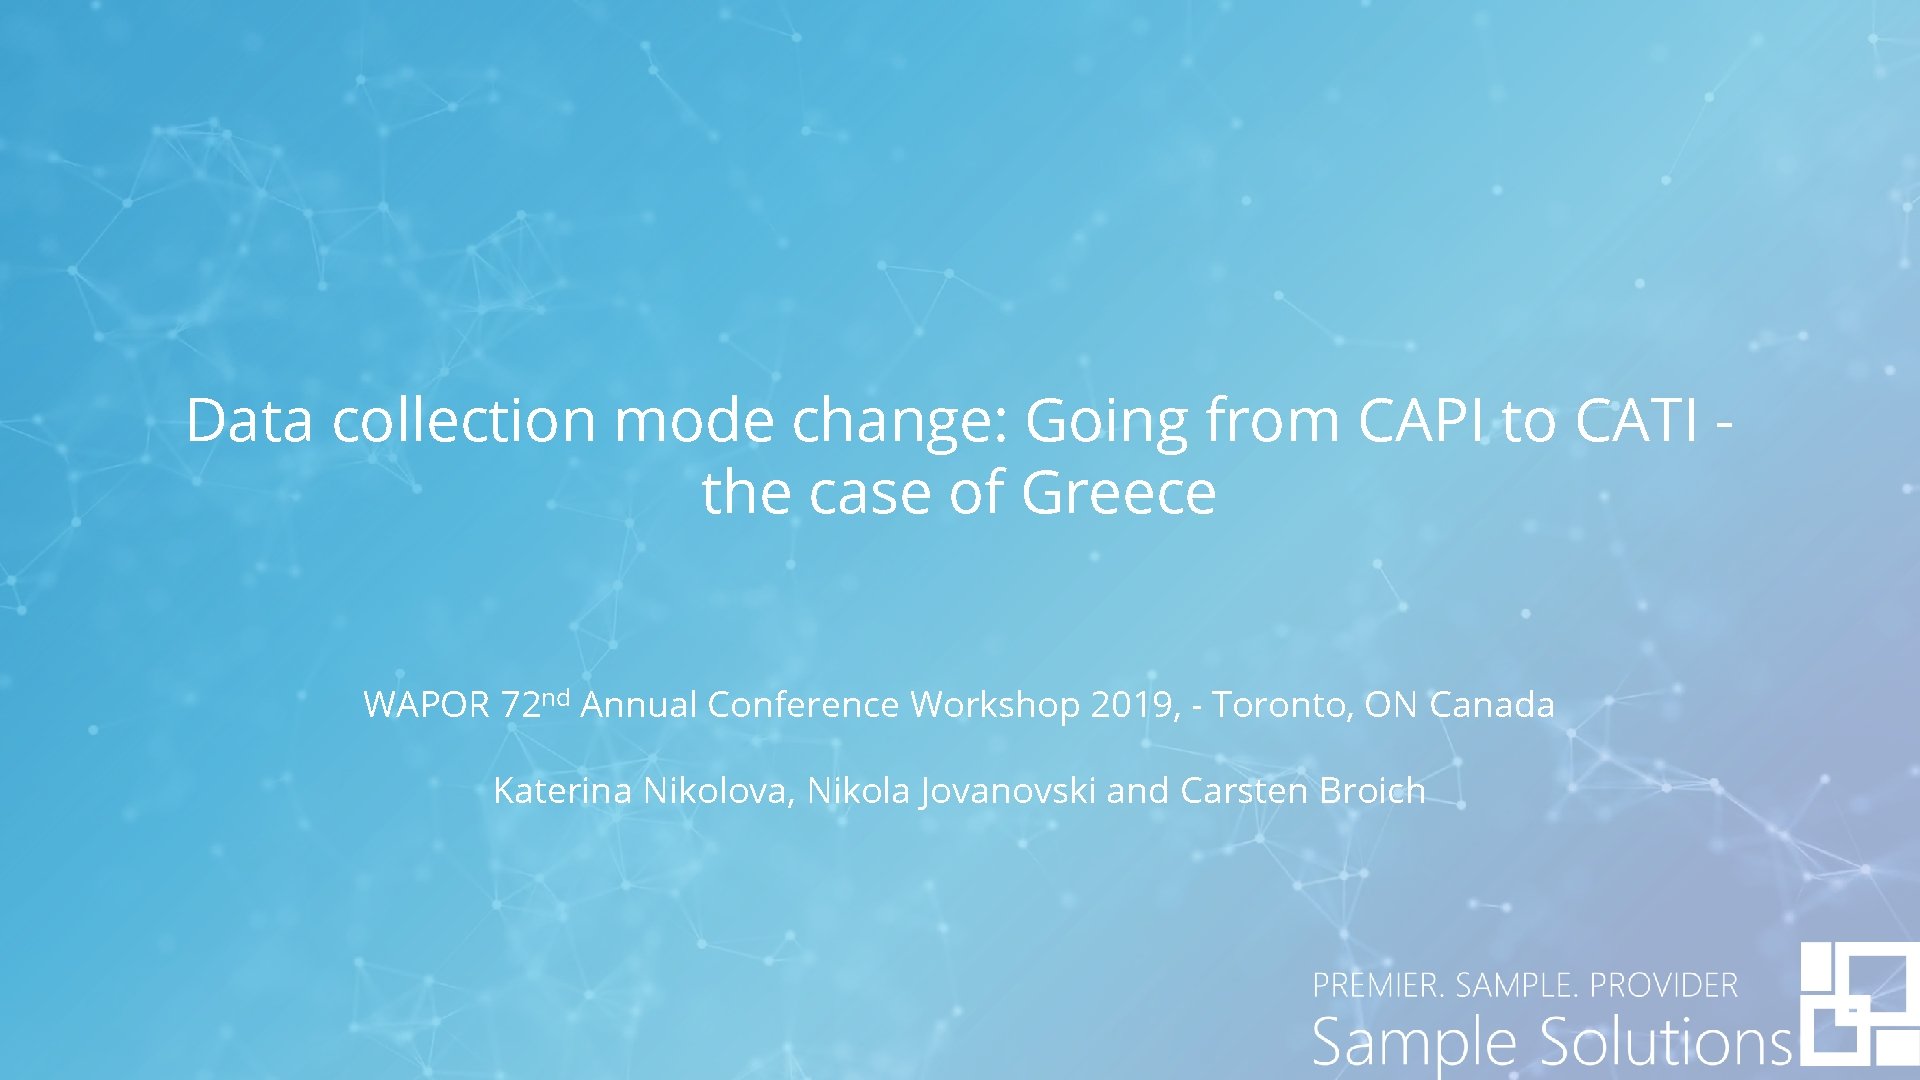 1 Data collection mode change: Going from CAPI to CATI the case of Greece